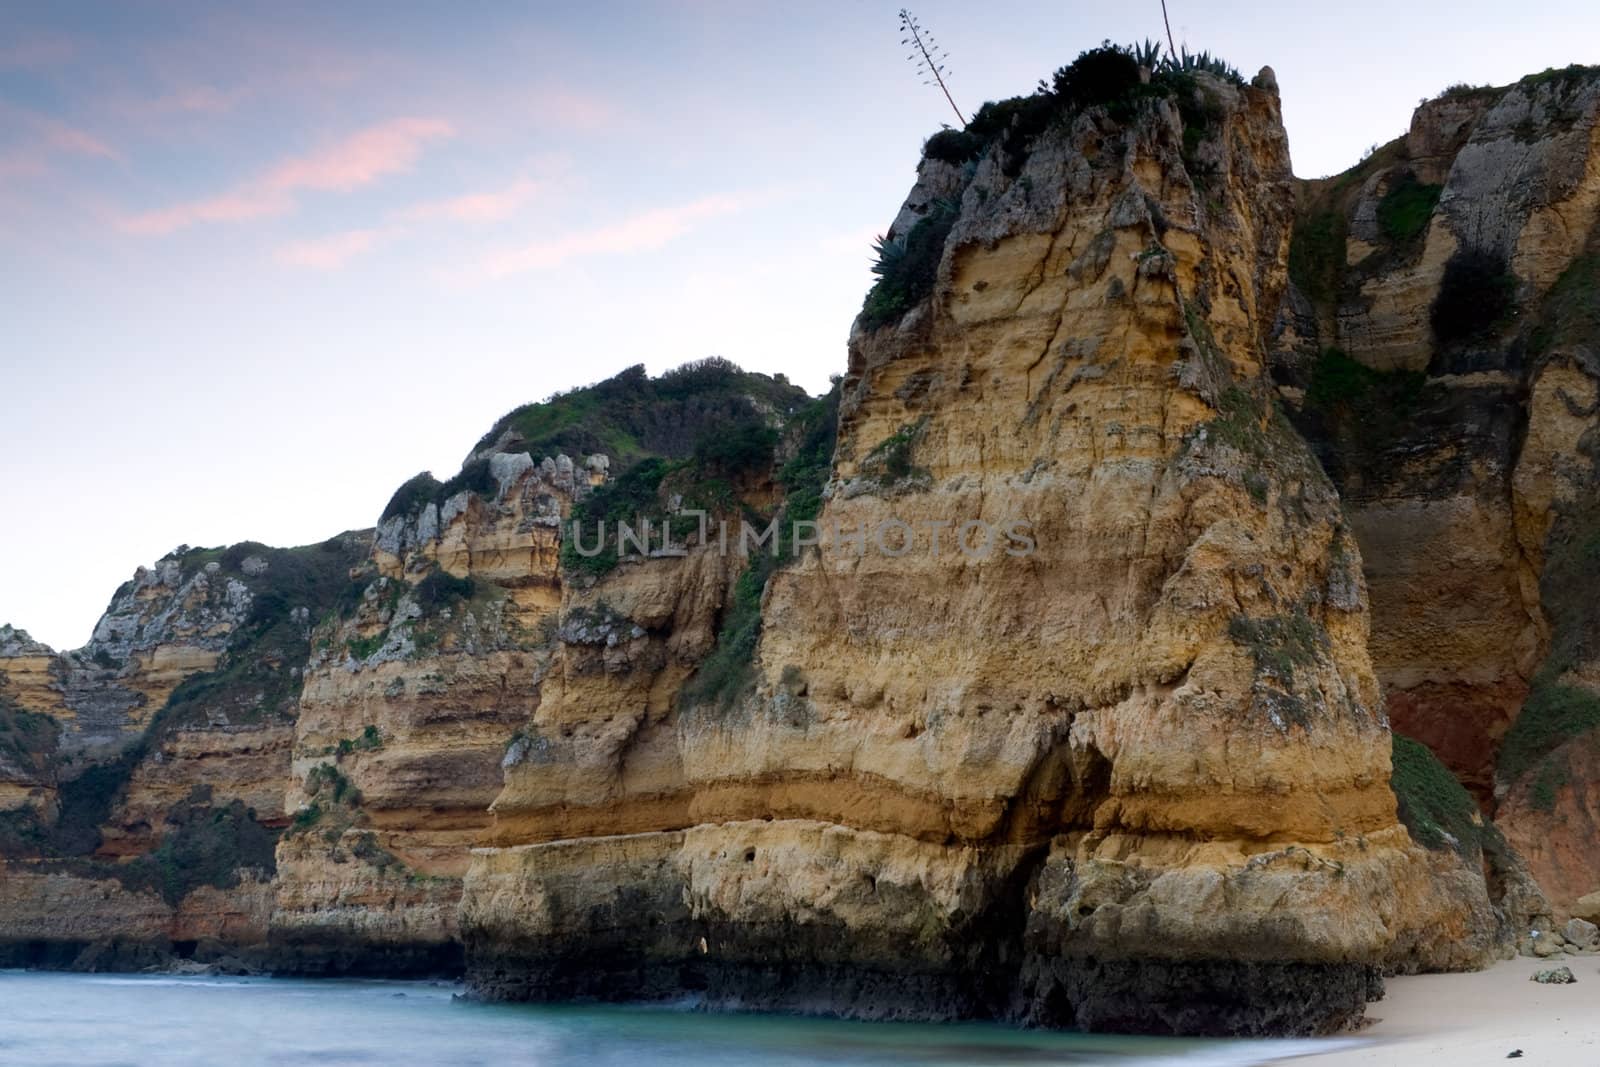 The sheer rocky cliffs at the beaches of 'Praia Dona Ana' in Lagos, Portugal, with a setting sunlit sky.